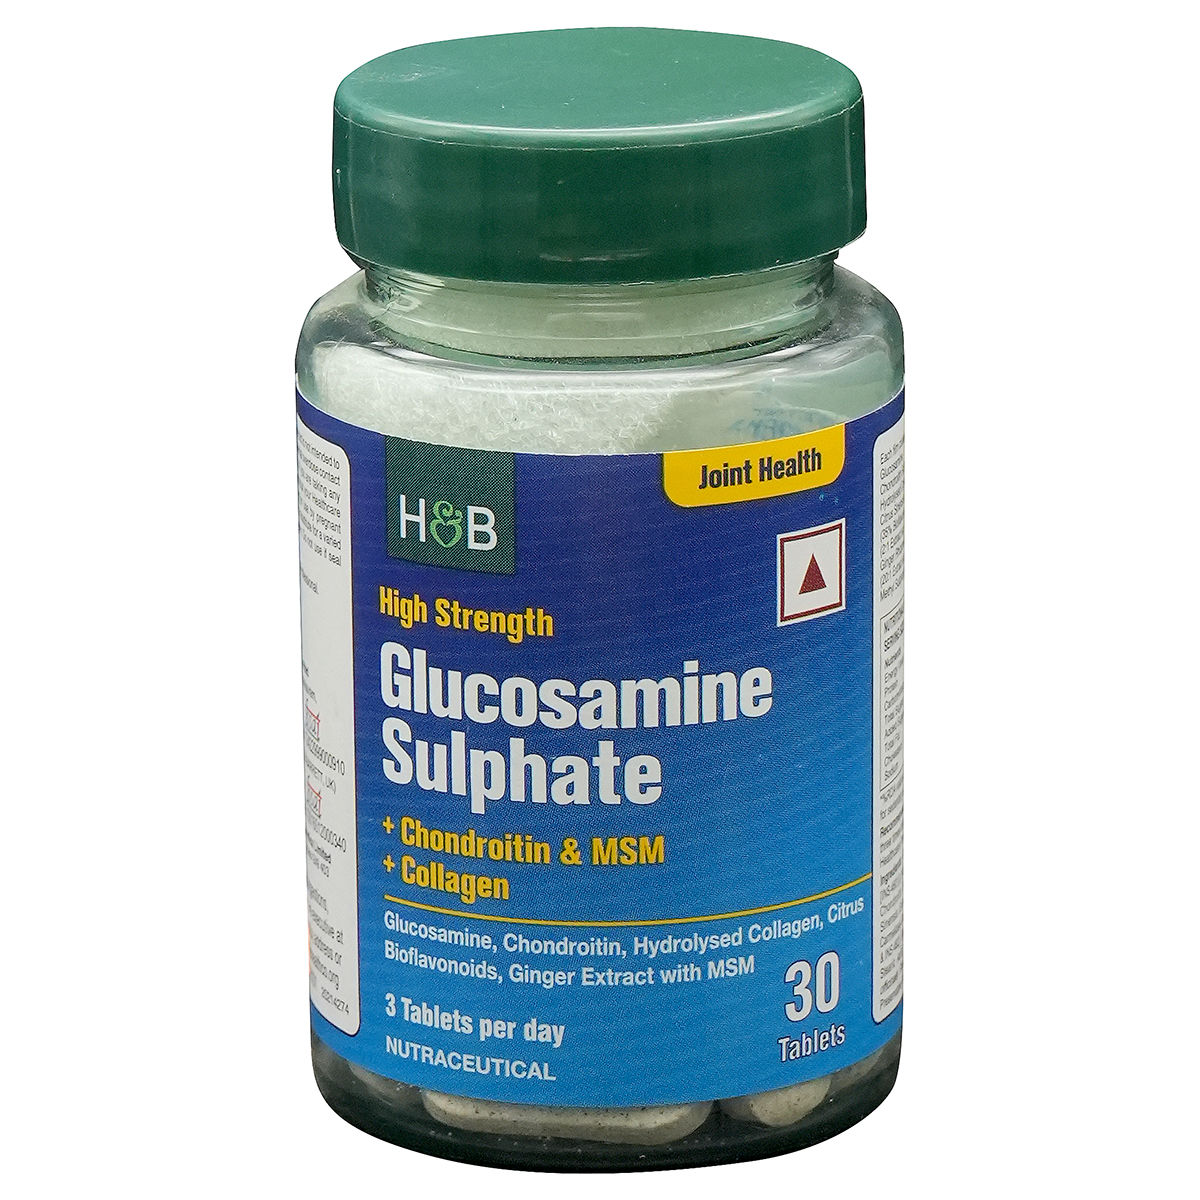 Buy Holland & Barrett High Strength Glucosamine Sulphate for Joint Health, 30 Tablets Online